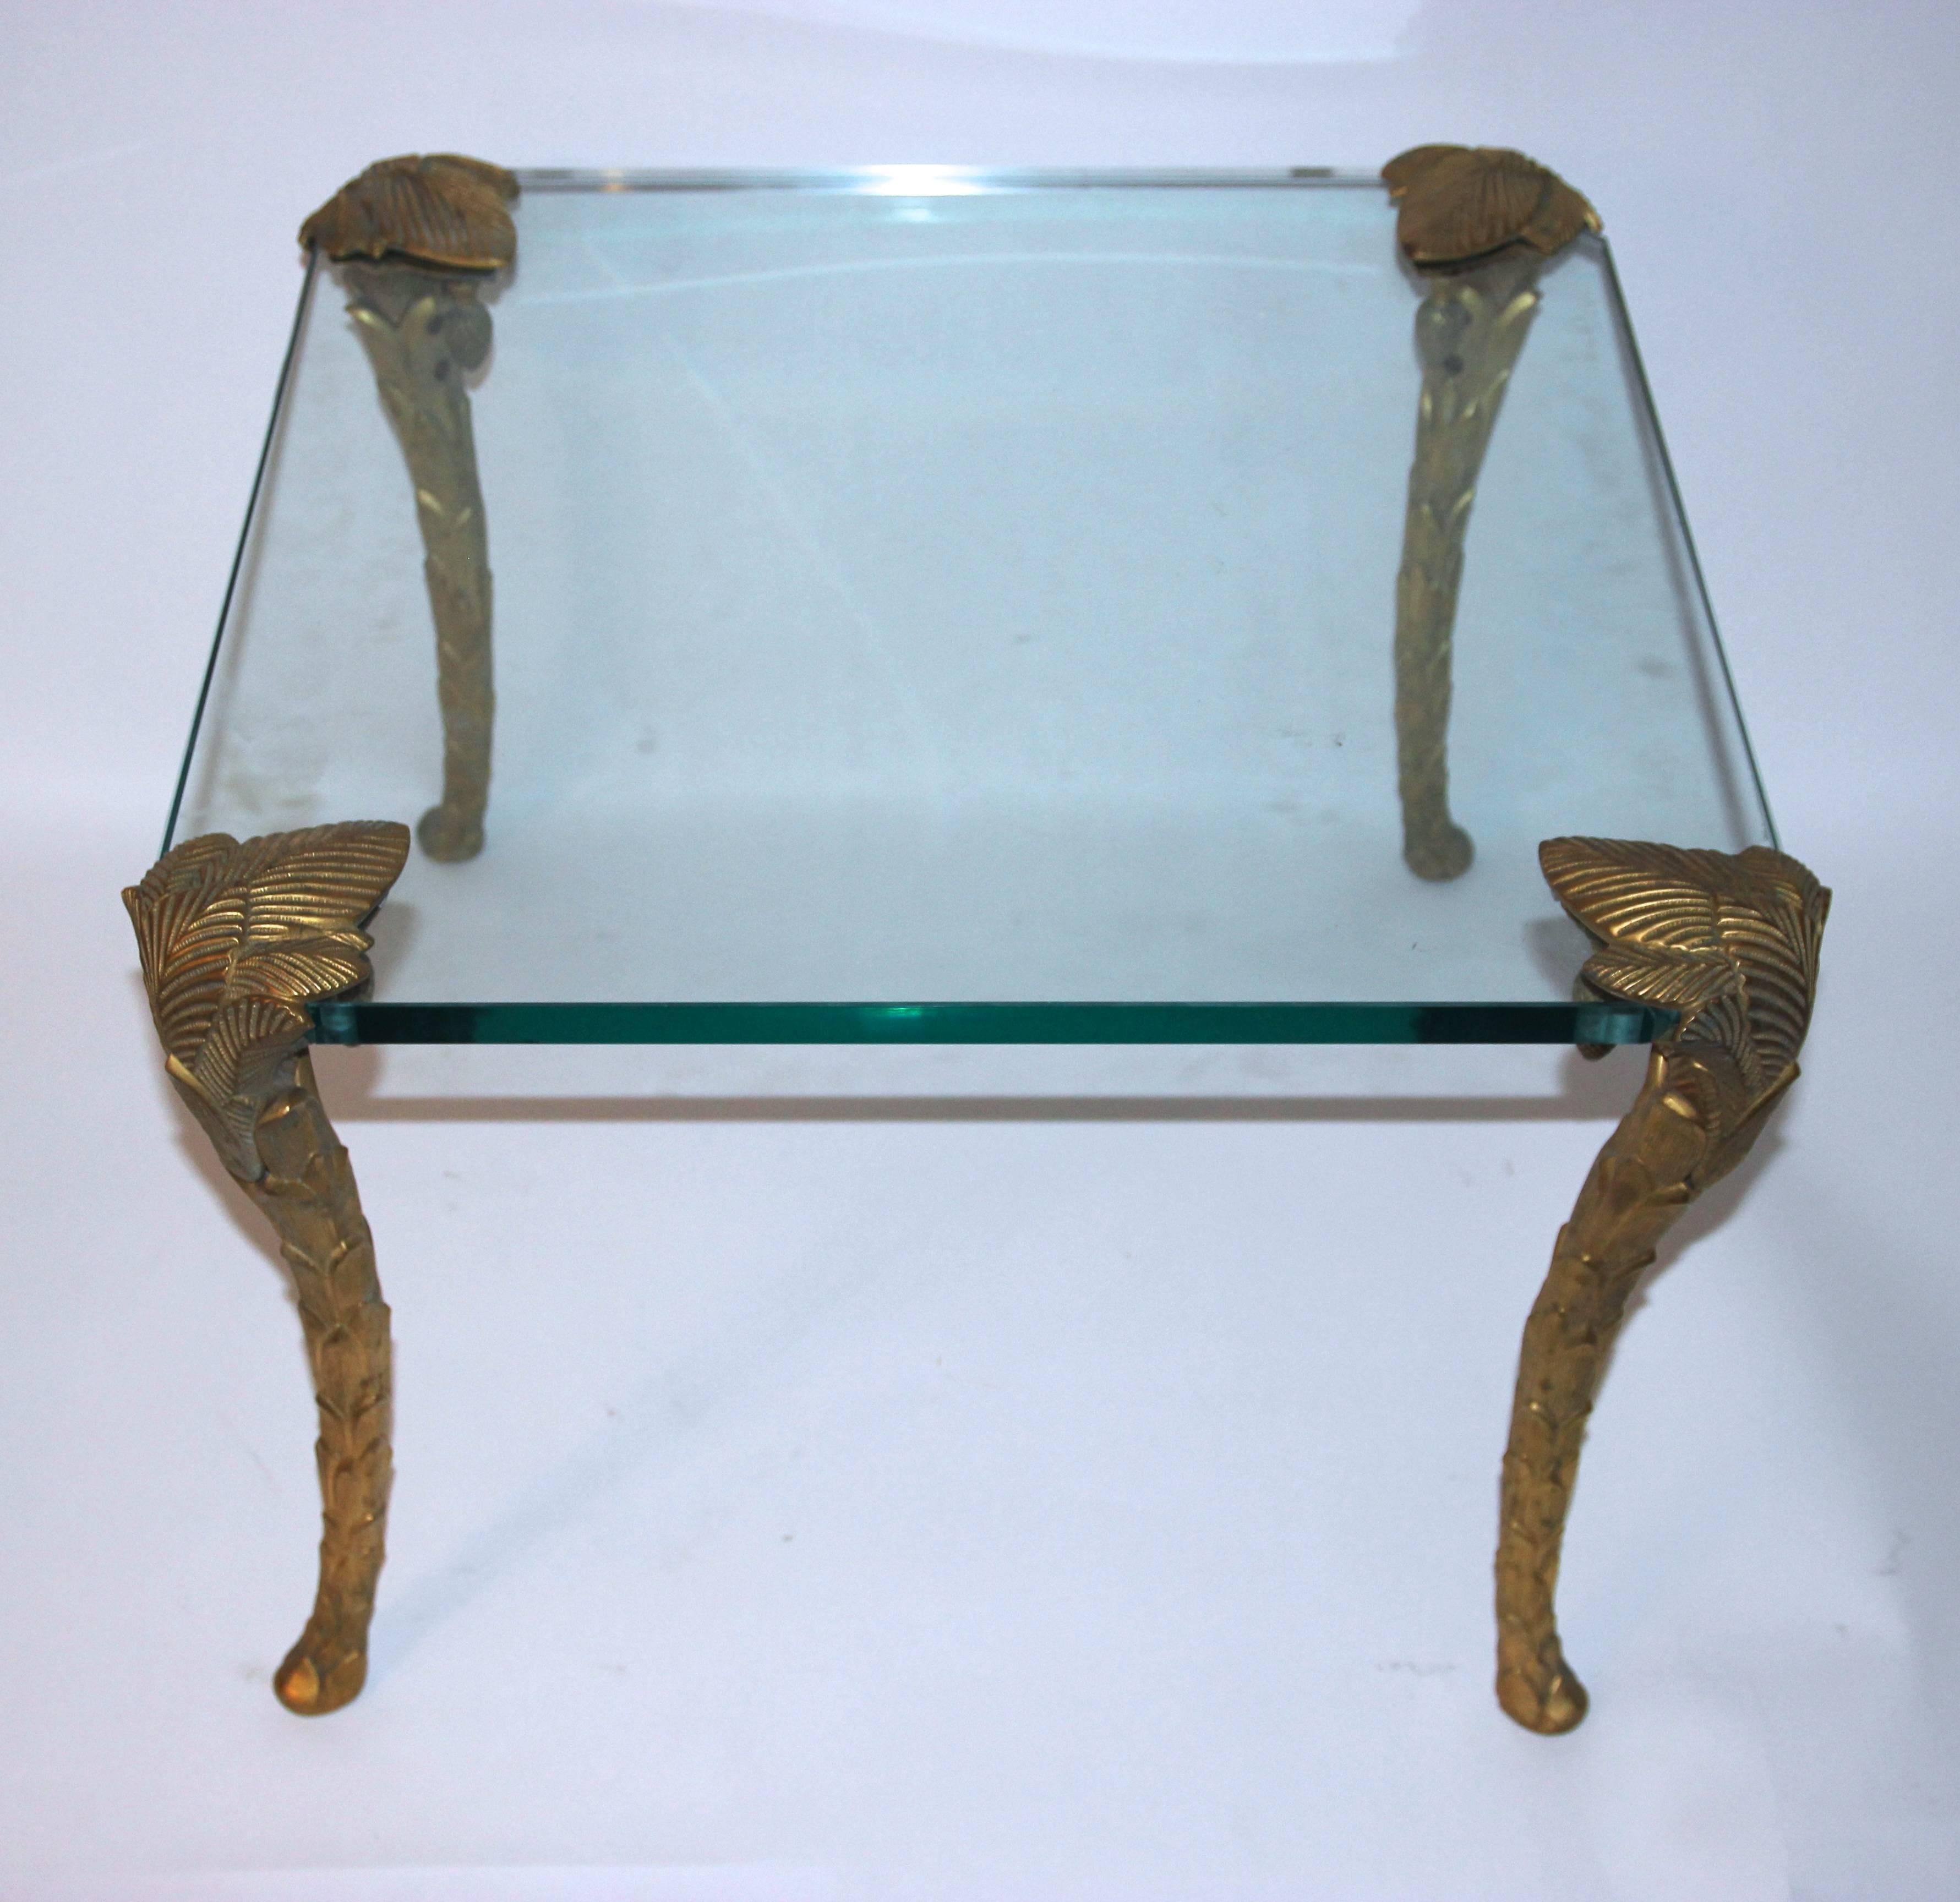 Pair of coffee tables.
Foot bronze palm decor,
thick glass top,
circa 1960, France.
Measures: Height 45 cm, width 60 cm, depth 60 cm.